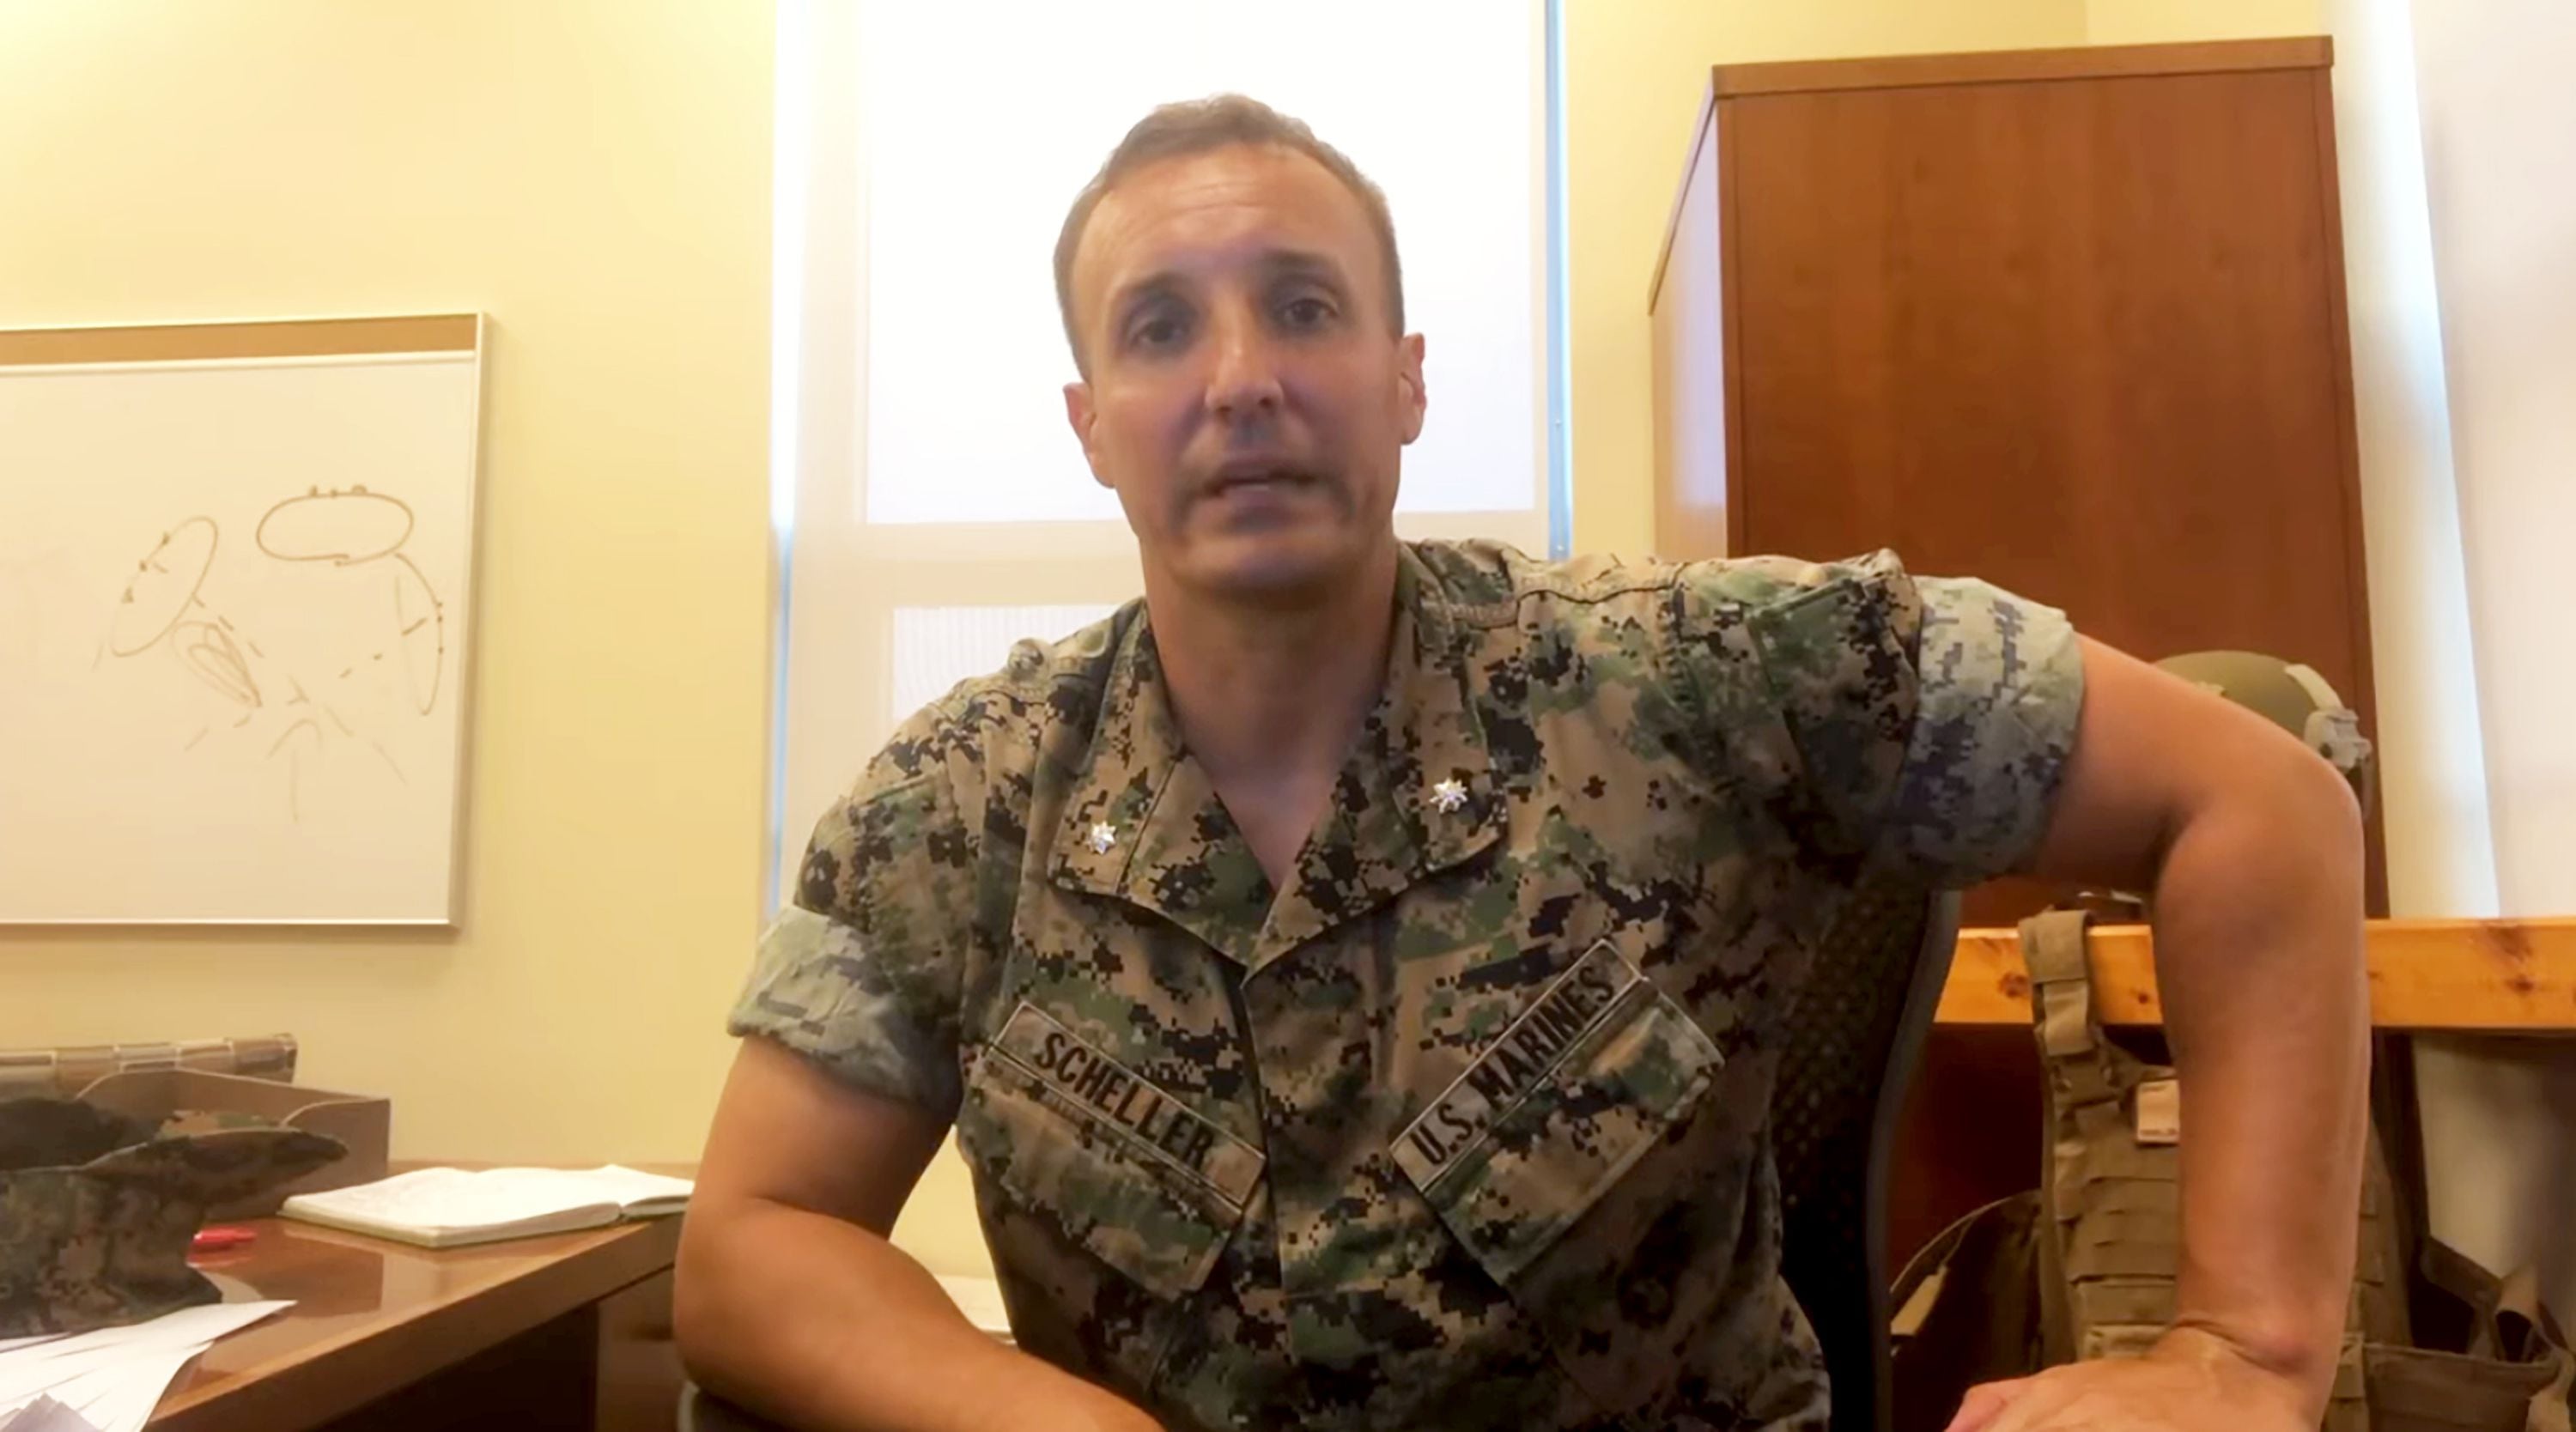 Lt. Col. Stuart Scheller, shown here in a screenshot from his first viral social media video, is now supporting getting veterans elected in Congress. (Screenshot Stuart Scheller Jr. Facebook)